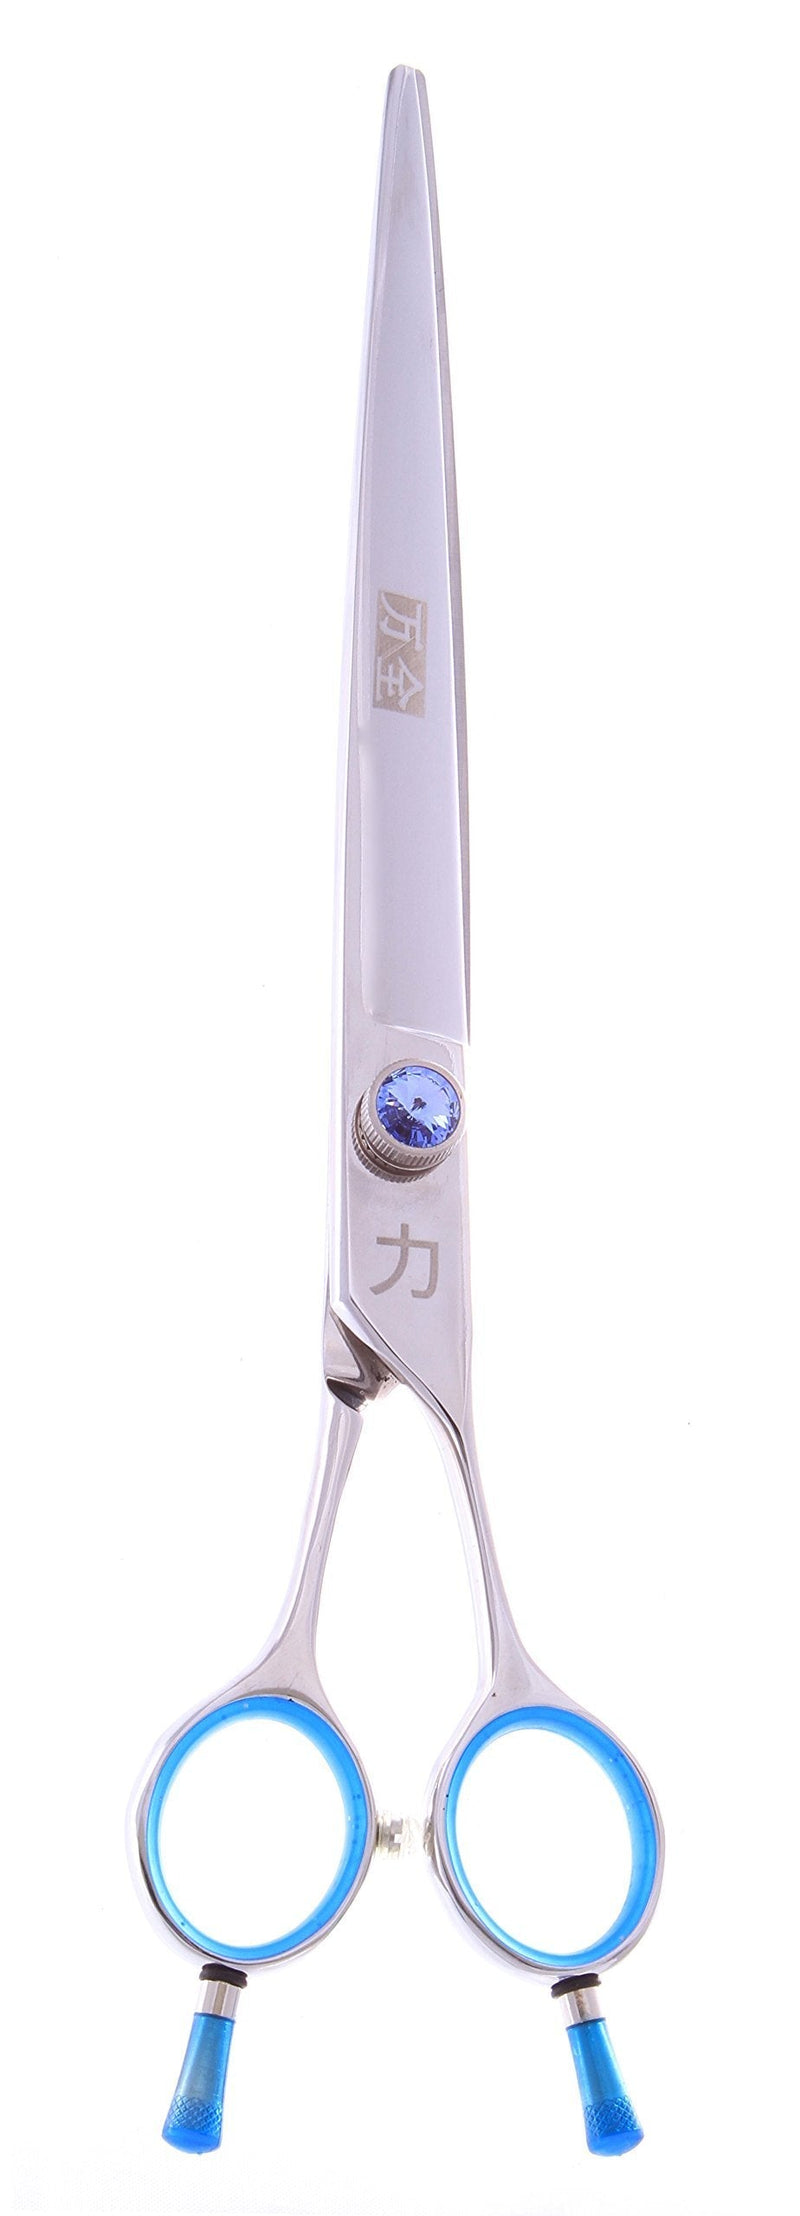 [Australia] - ShearsDirect Japanese 440C Professional Grooming Shear with Light Blue Gem Stone Tension and Double Finger Rest, 8.0-Inch 